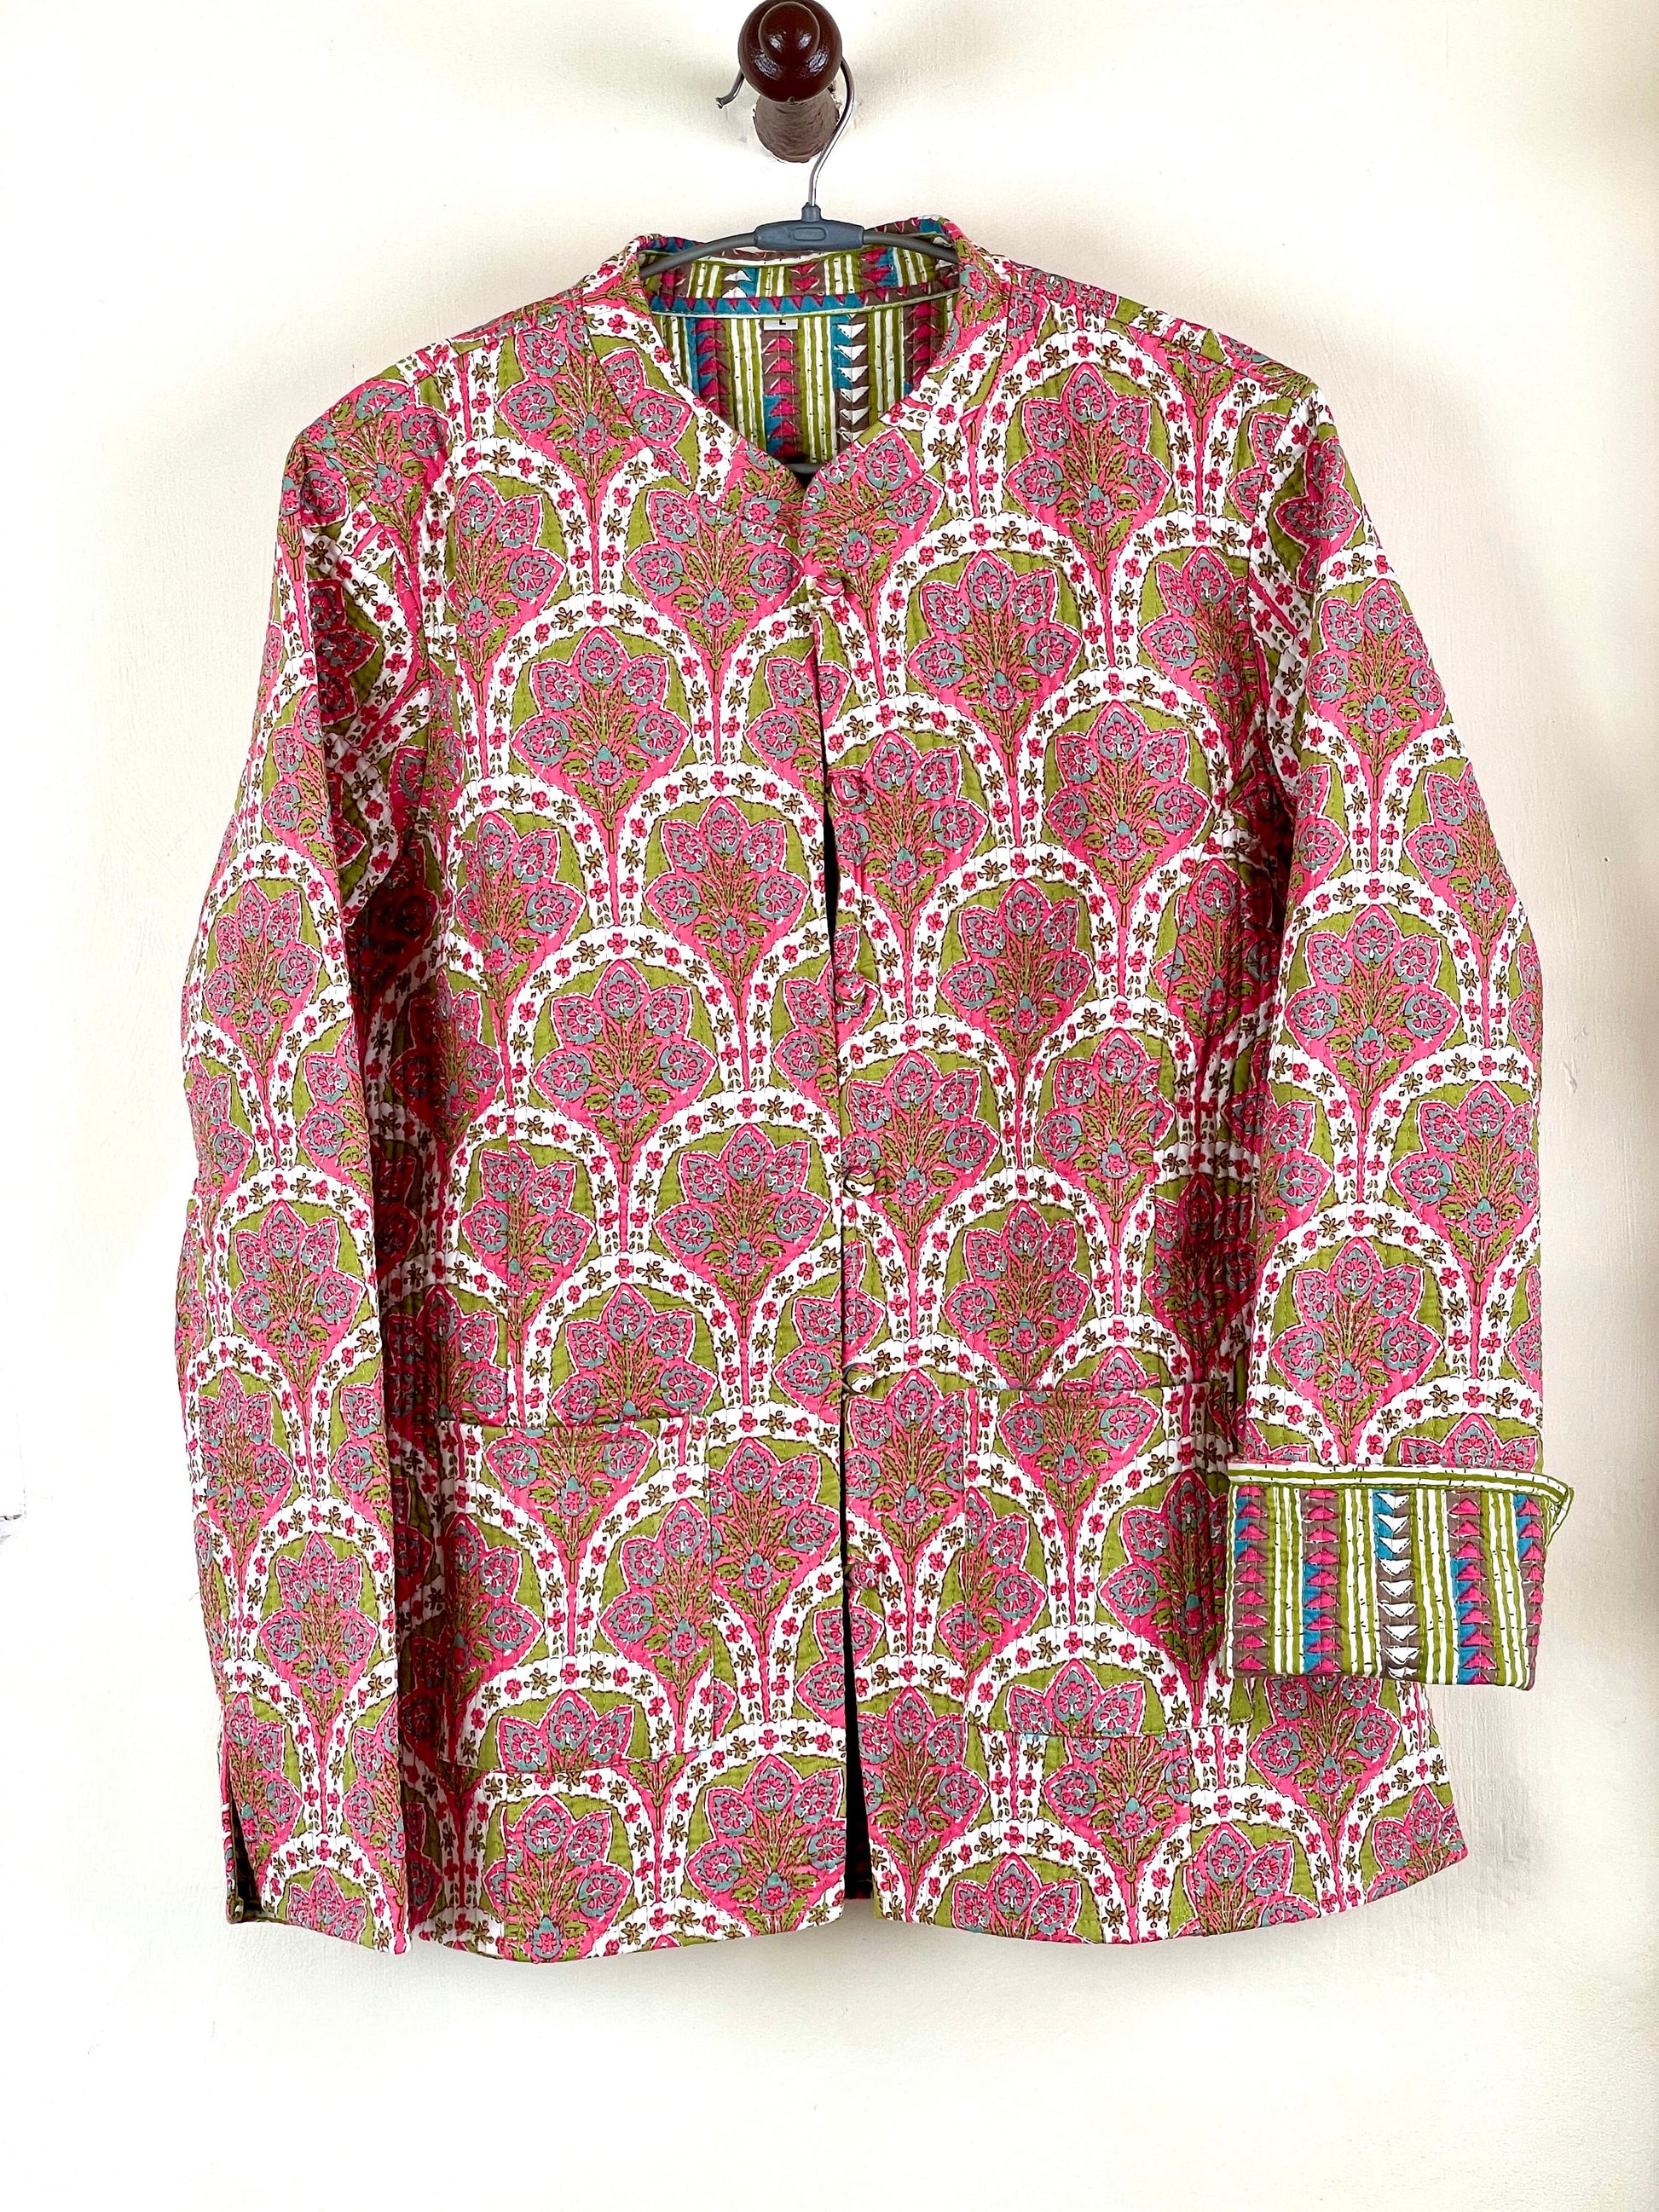 Indian Handmade Quilted Fabric Jacket Stylish Pink & Green Women's Coat, Reversible Jacket for Her